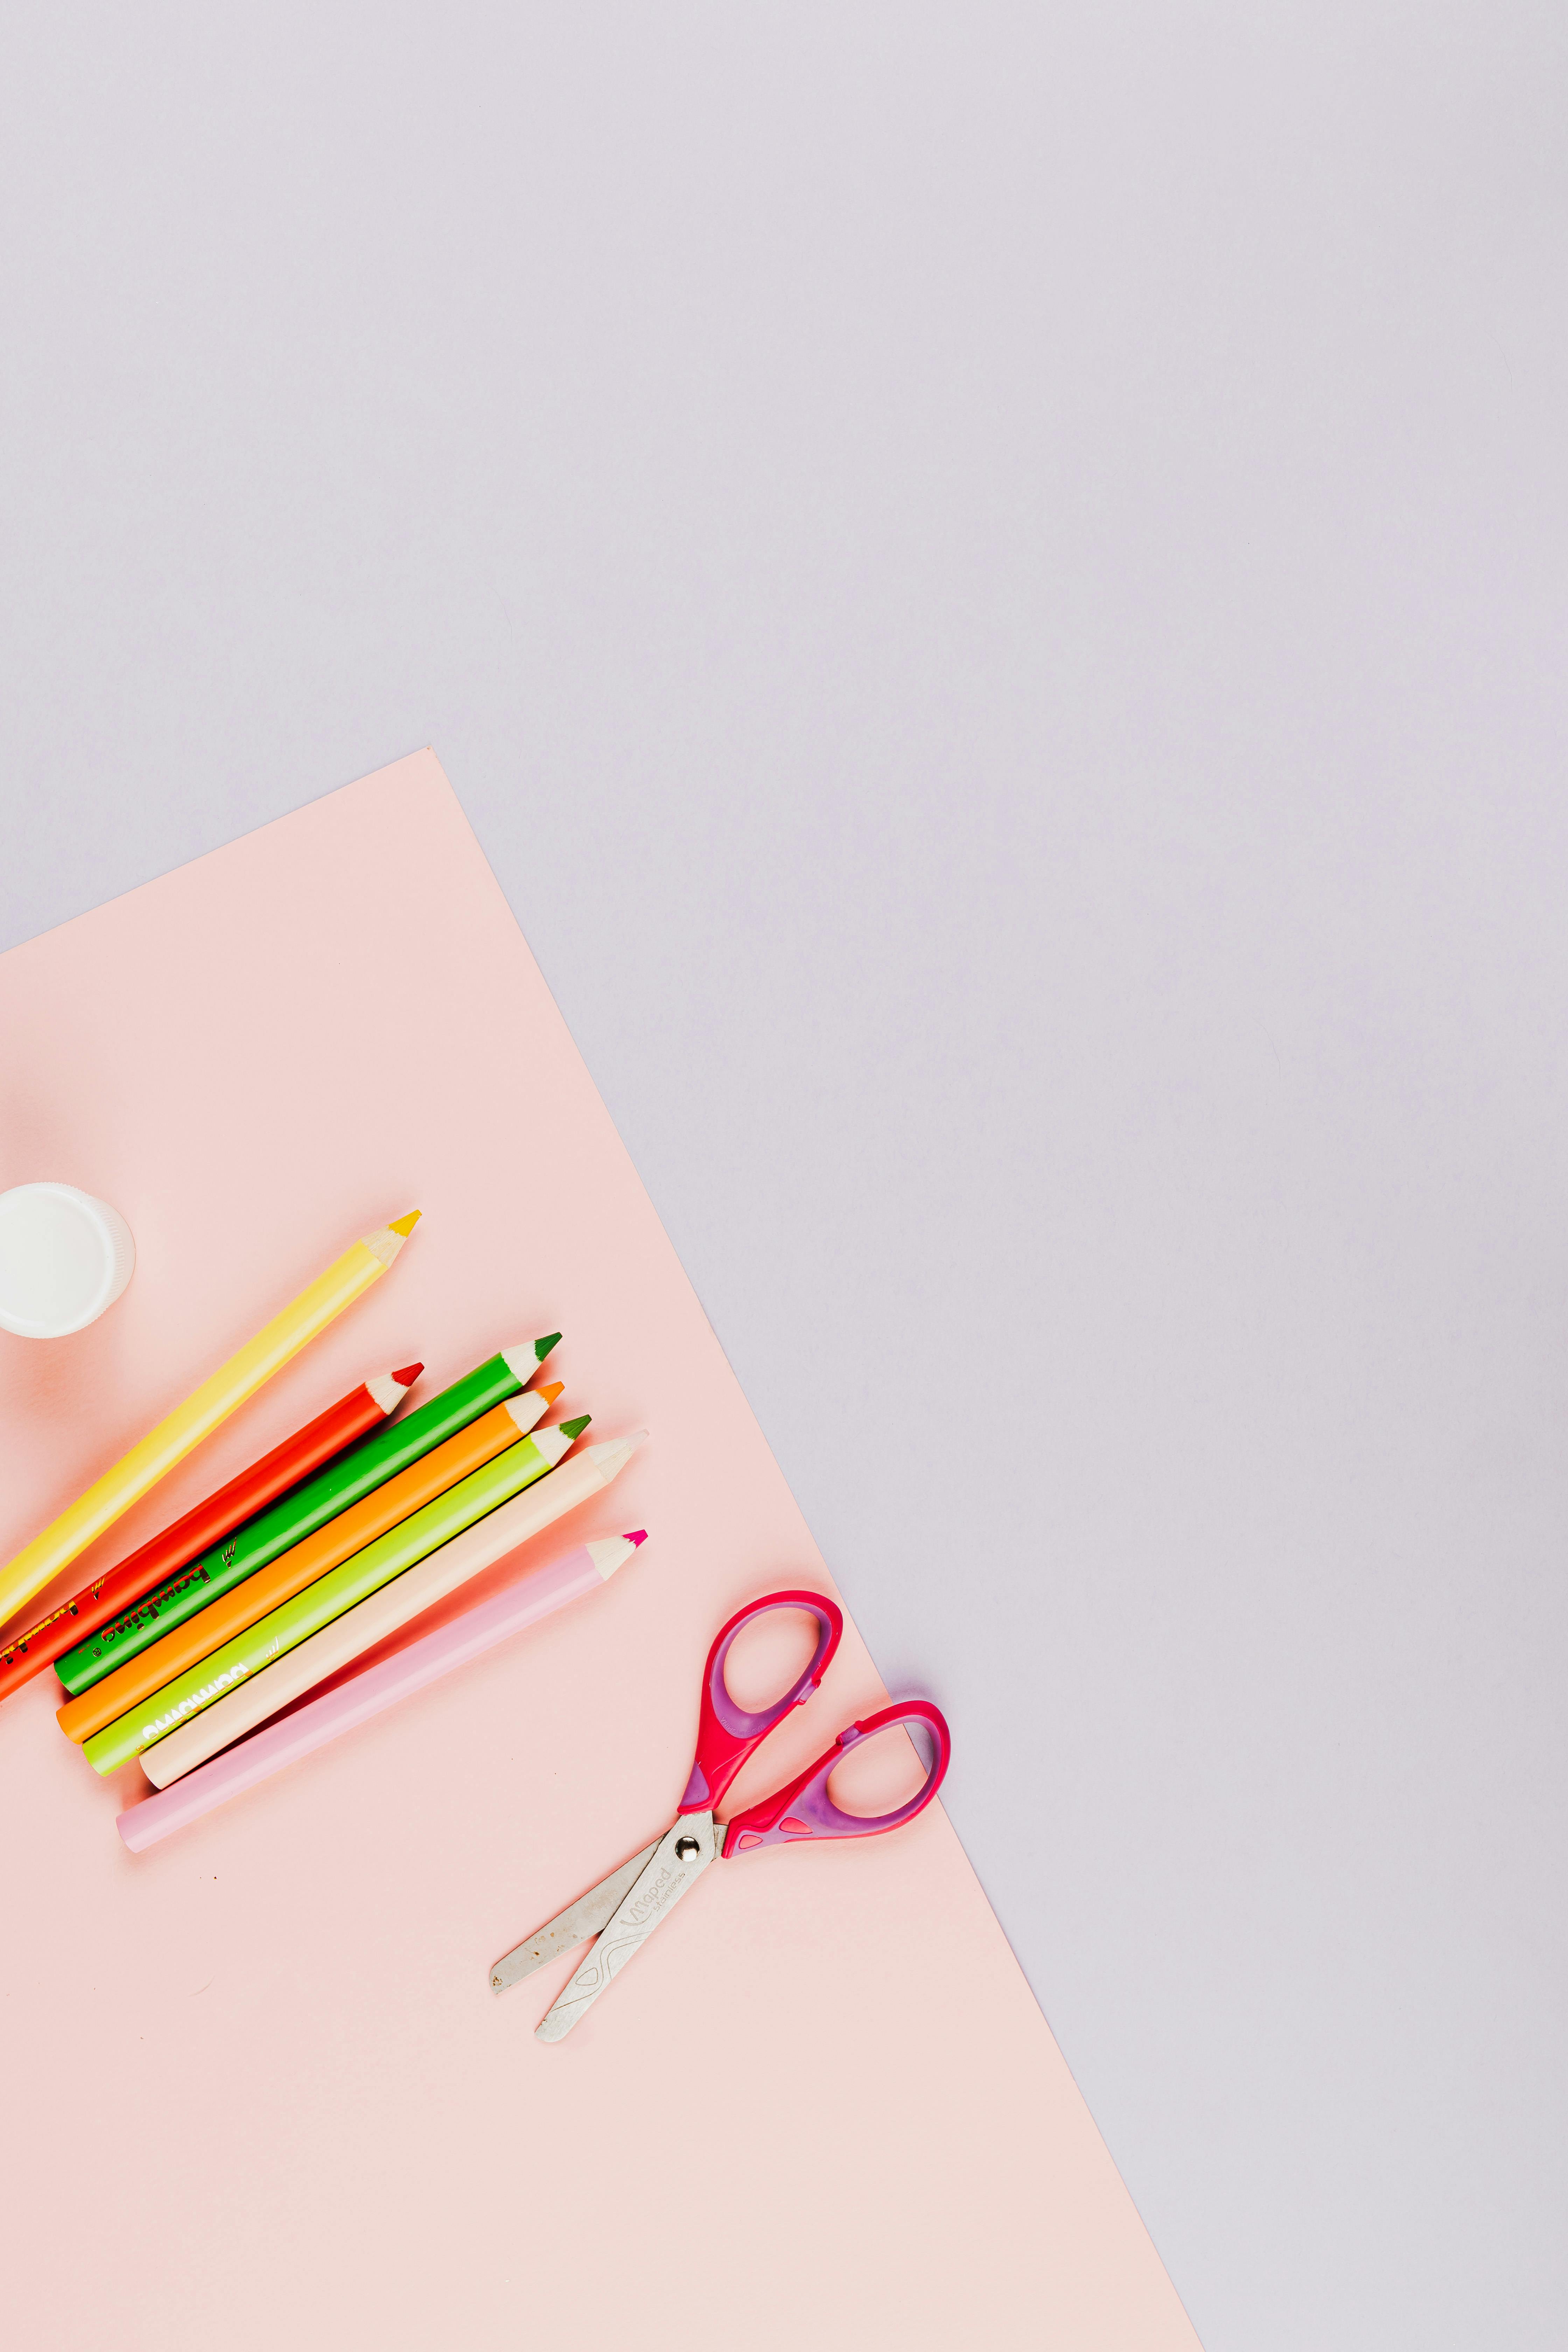 School Or Art Supplies On Pink Background Stock Photo - Download